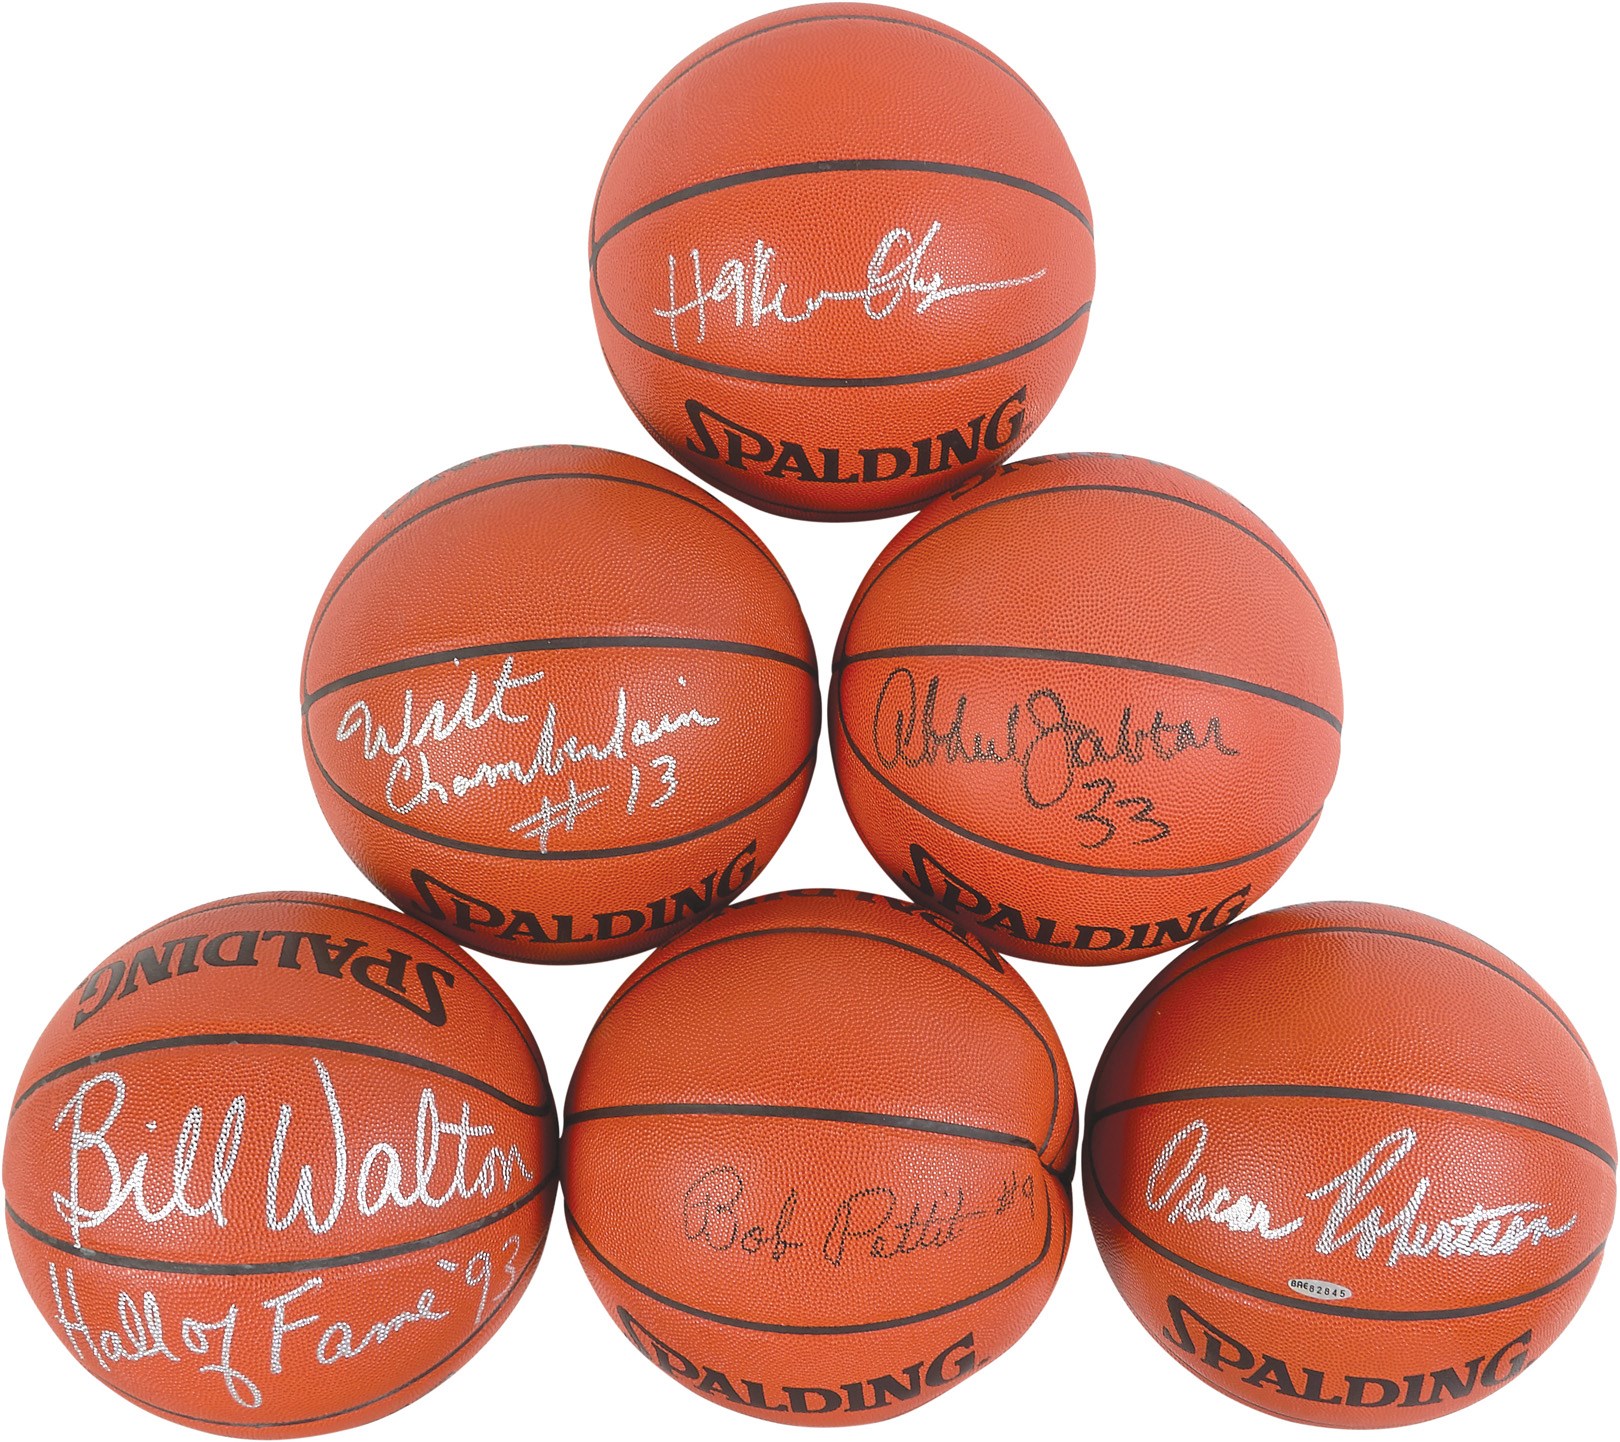 NBA 50 Greatest & Legends Signed Basketball Collection with Wilt Chamberlain (11)